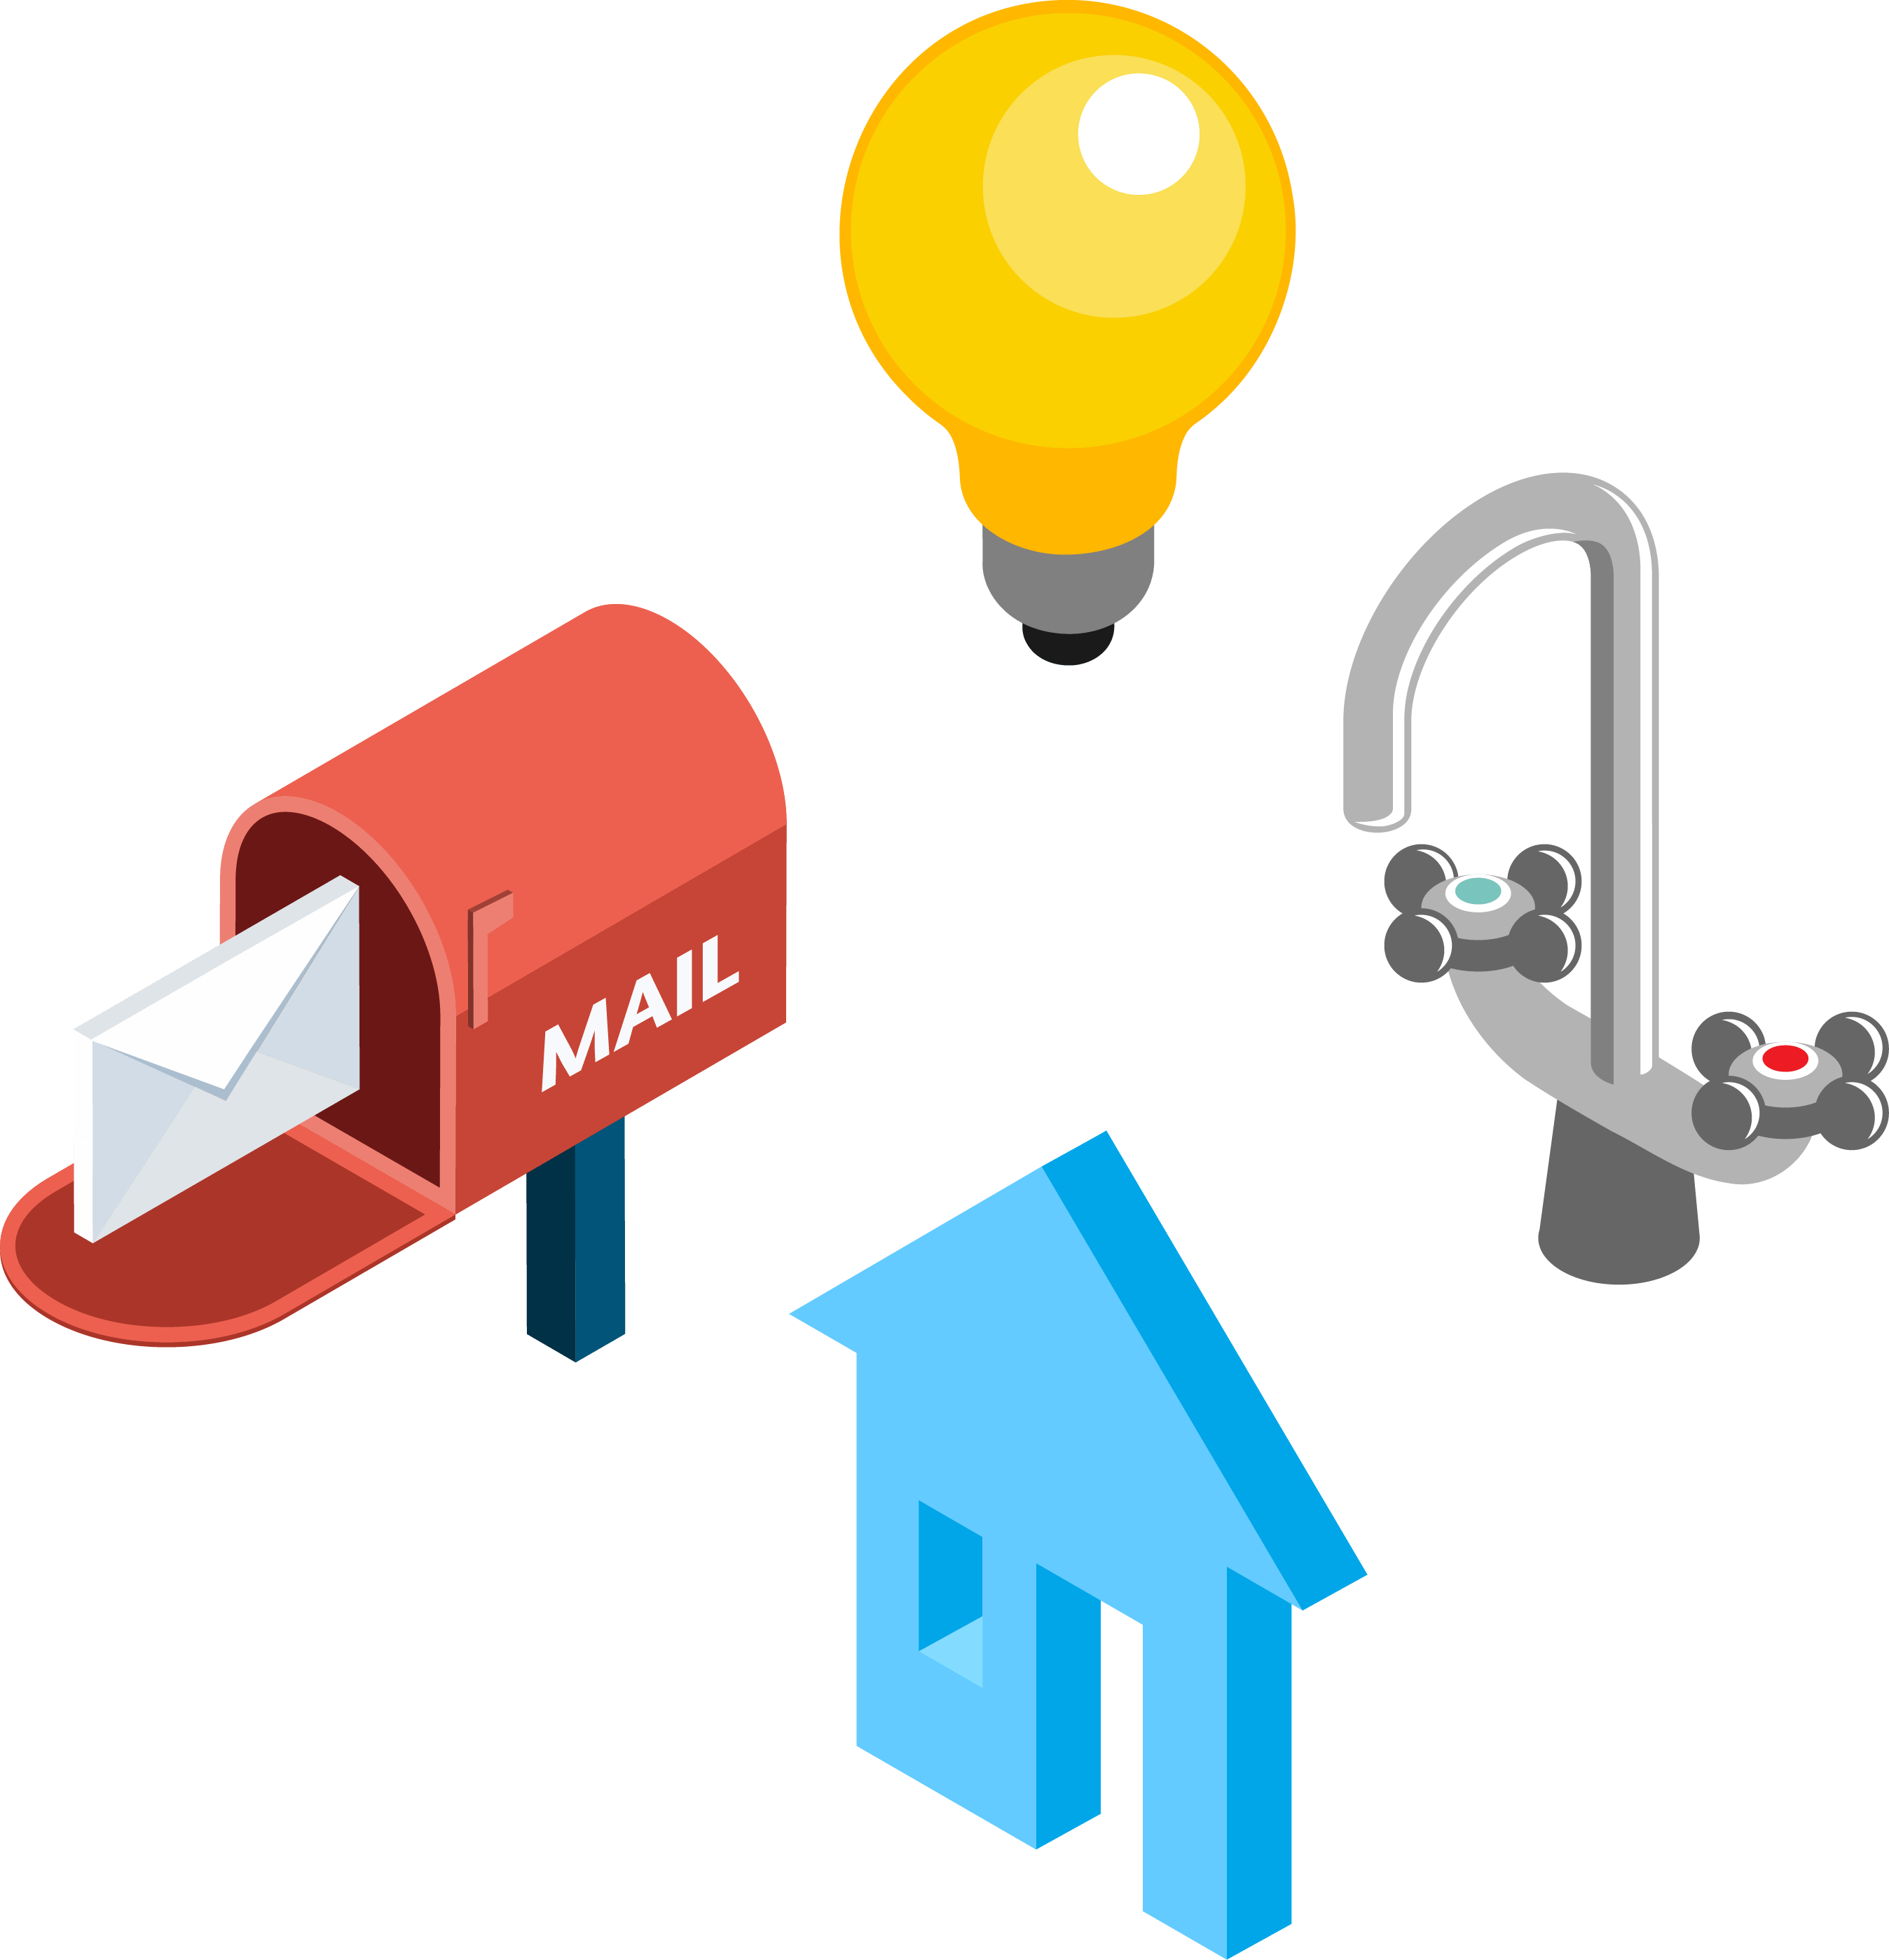 Lightbulb, mailbox, house and faucet icons